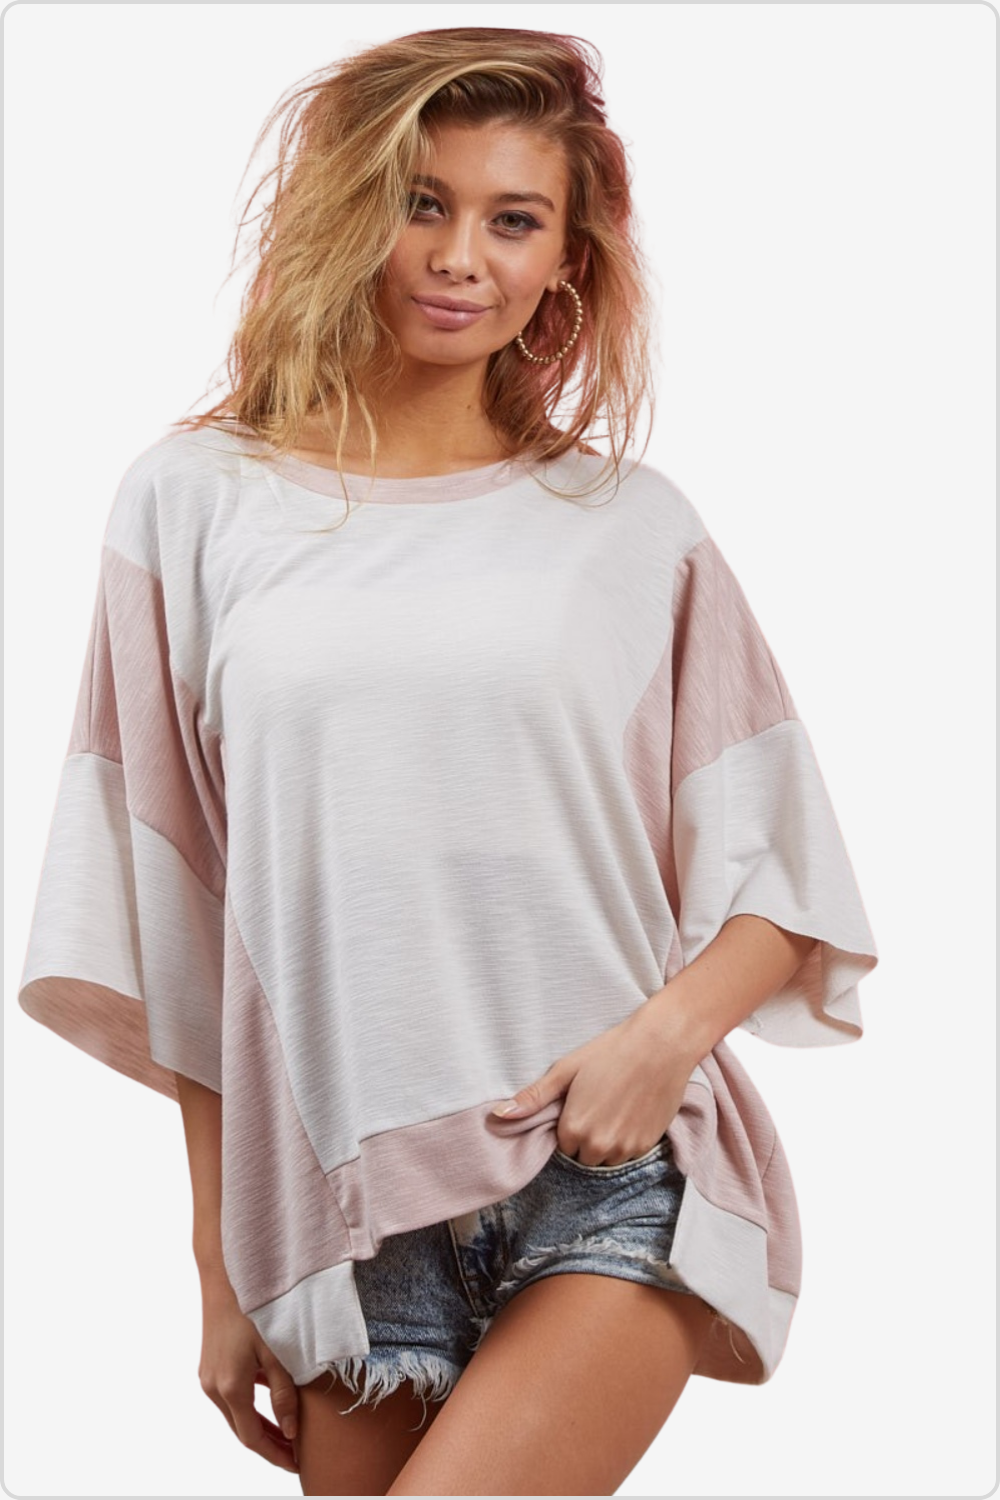 Stylish color block round neck t-shirt for a modern casual look